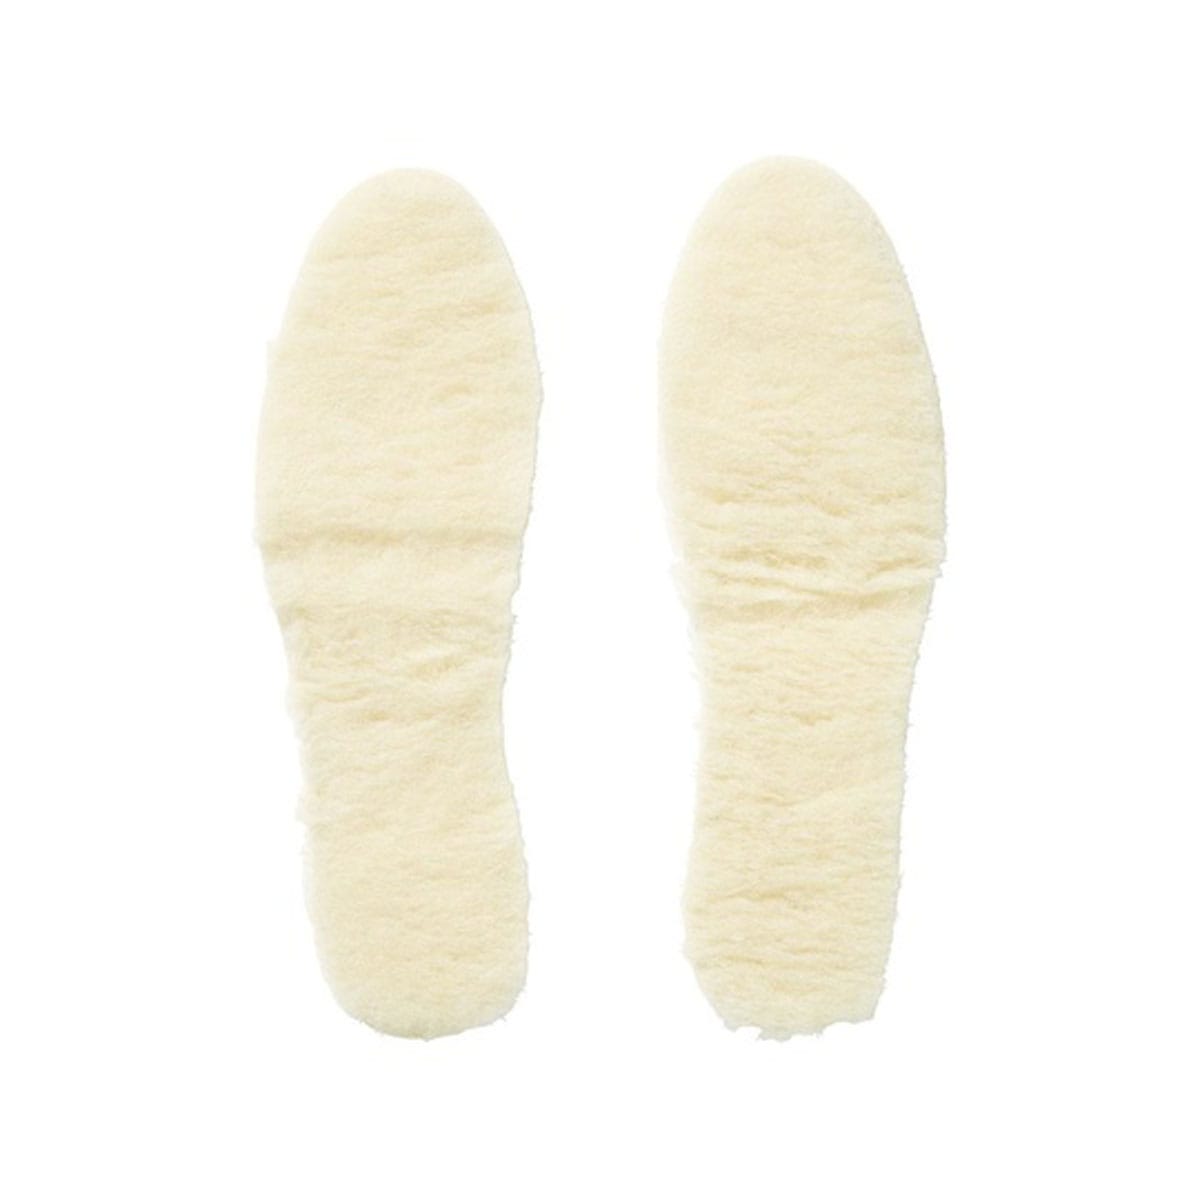 Footcare Lamb's Wool Insole | FootHealth Insoles